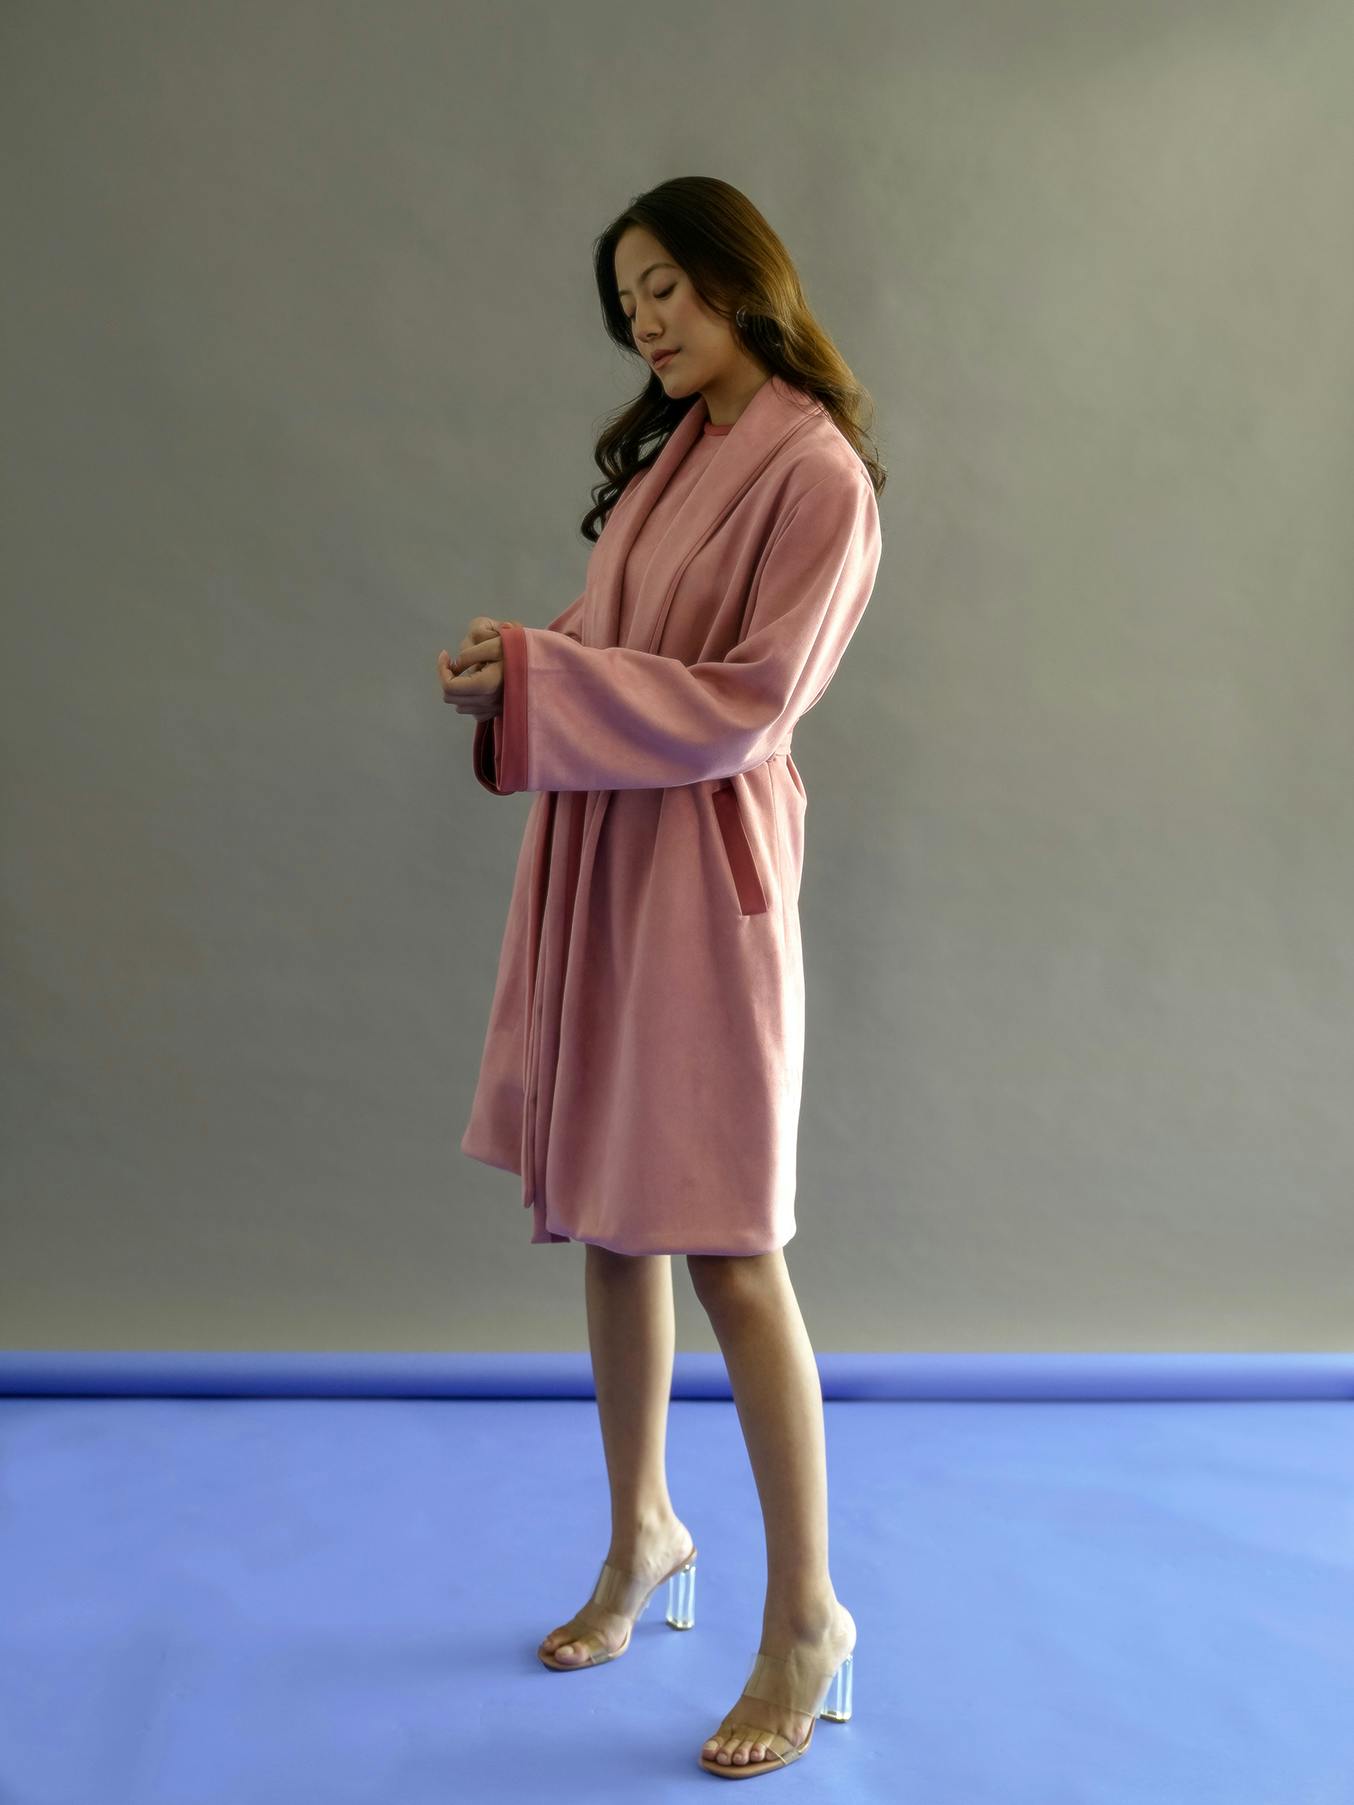 Thumbnail preview #1 for Blush pink coat 